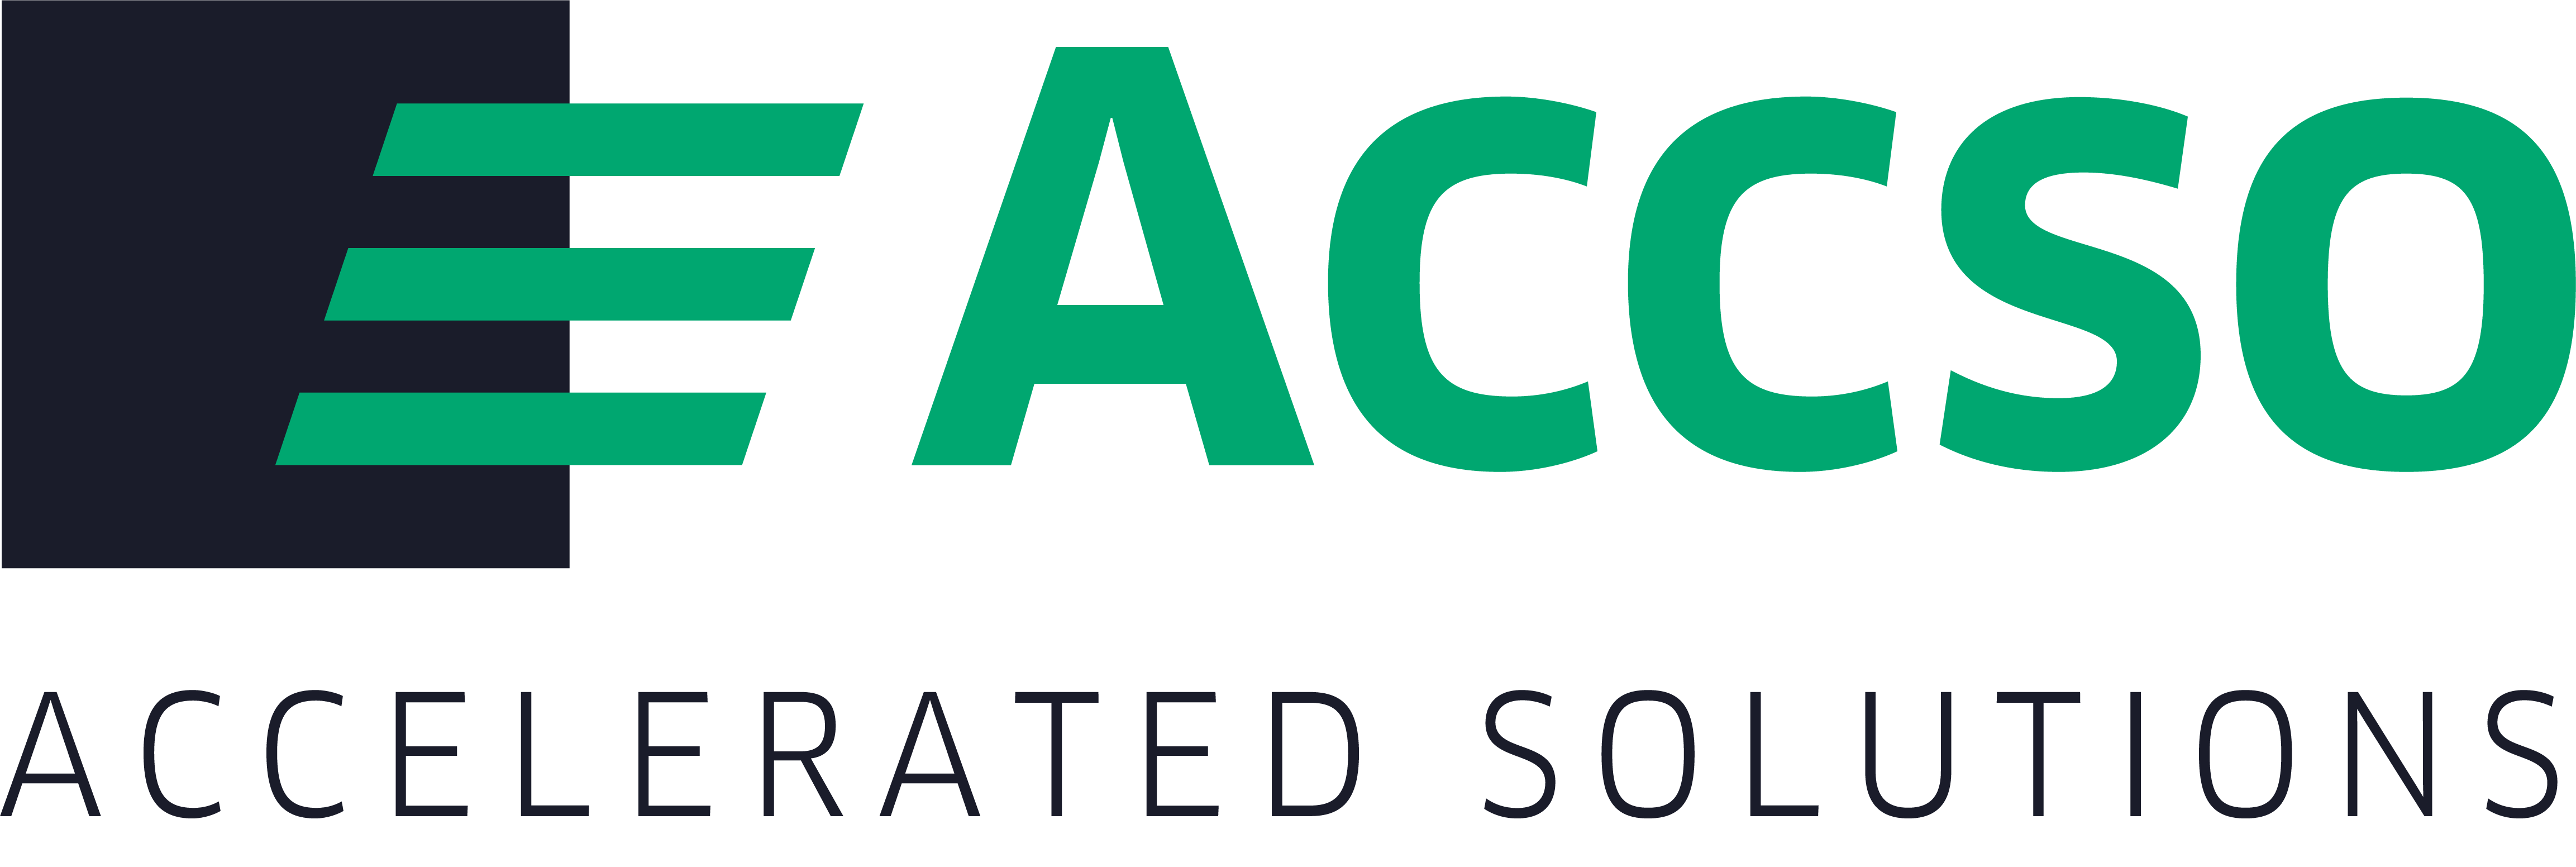 Accso - Accelerated Solutions GmbH